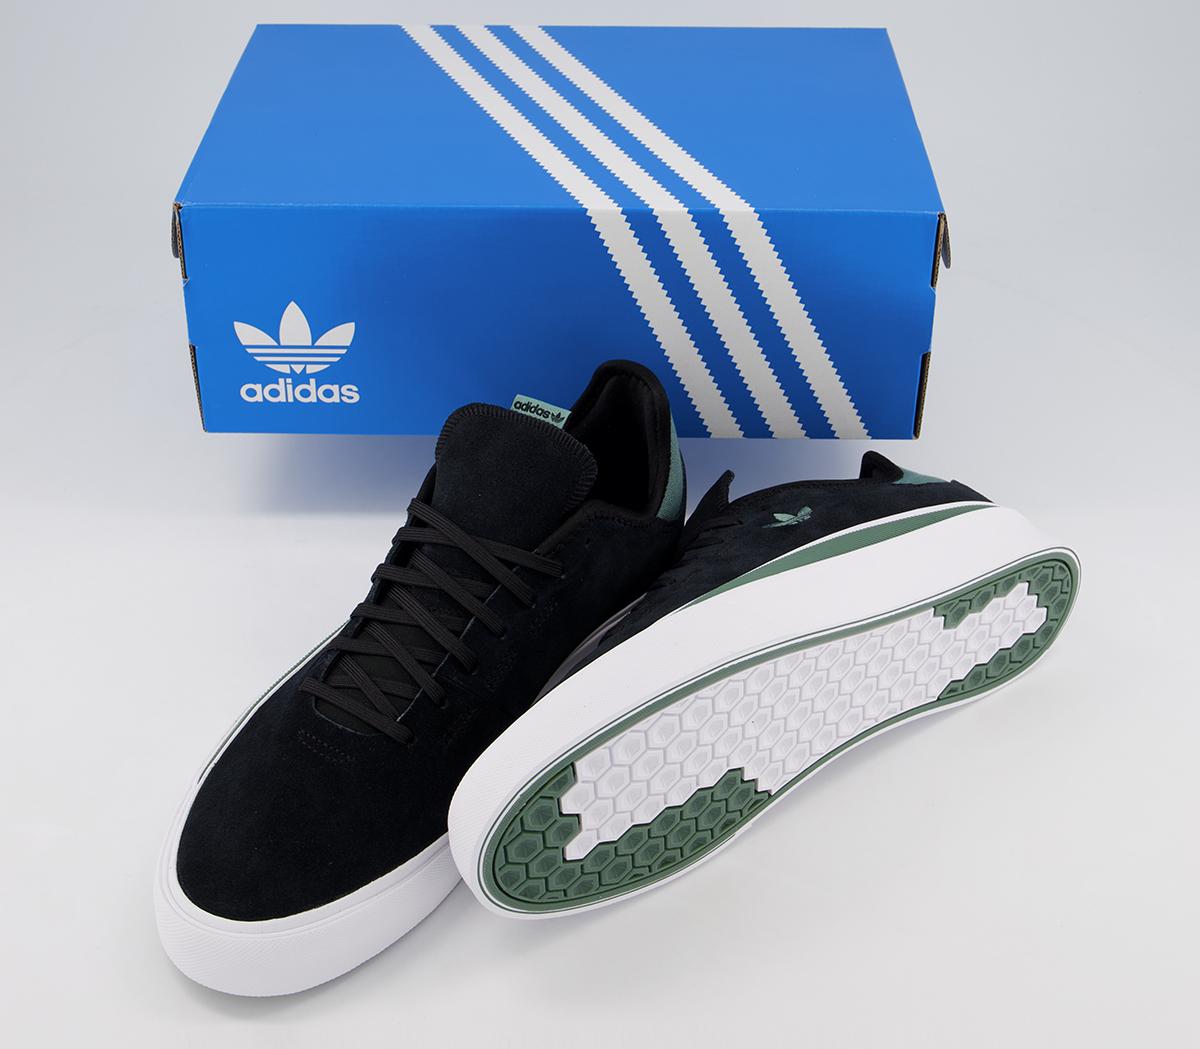 adidas Sabalo Trainers Core Black White Tech Emerald - His trainers